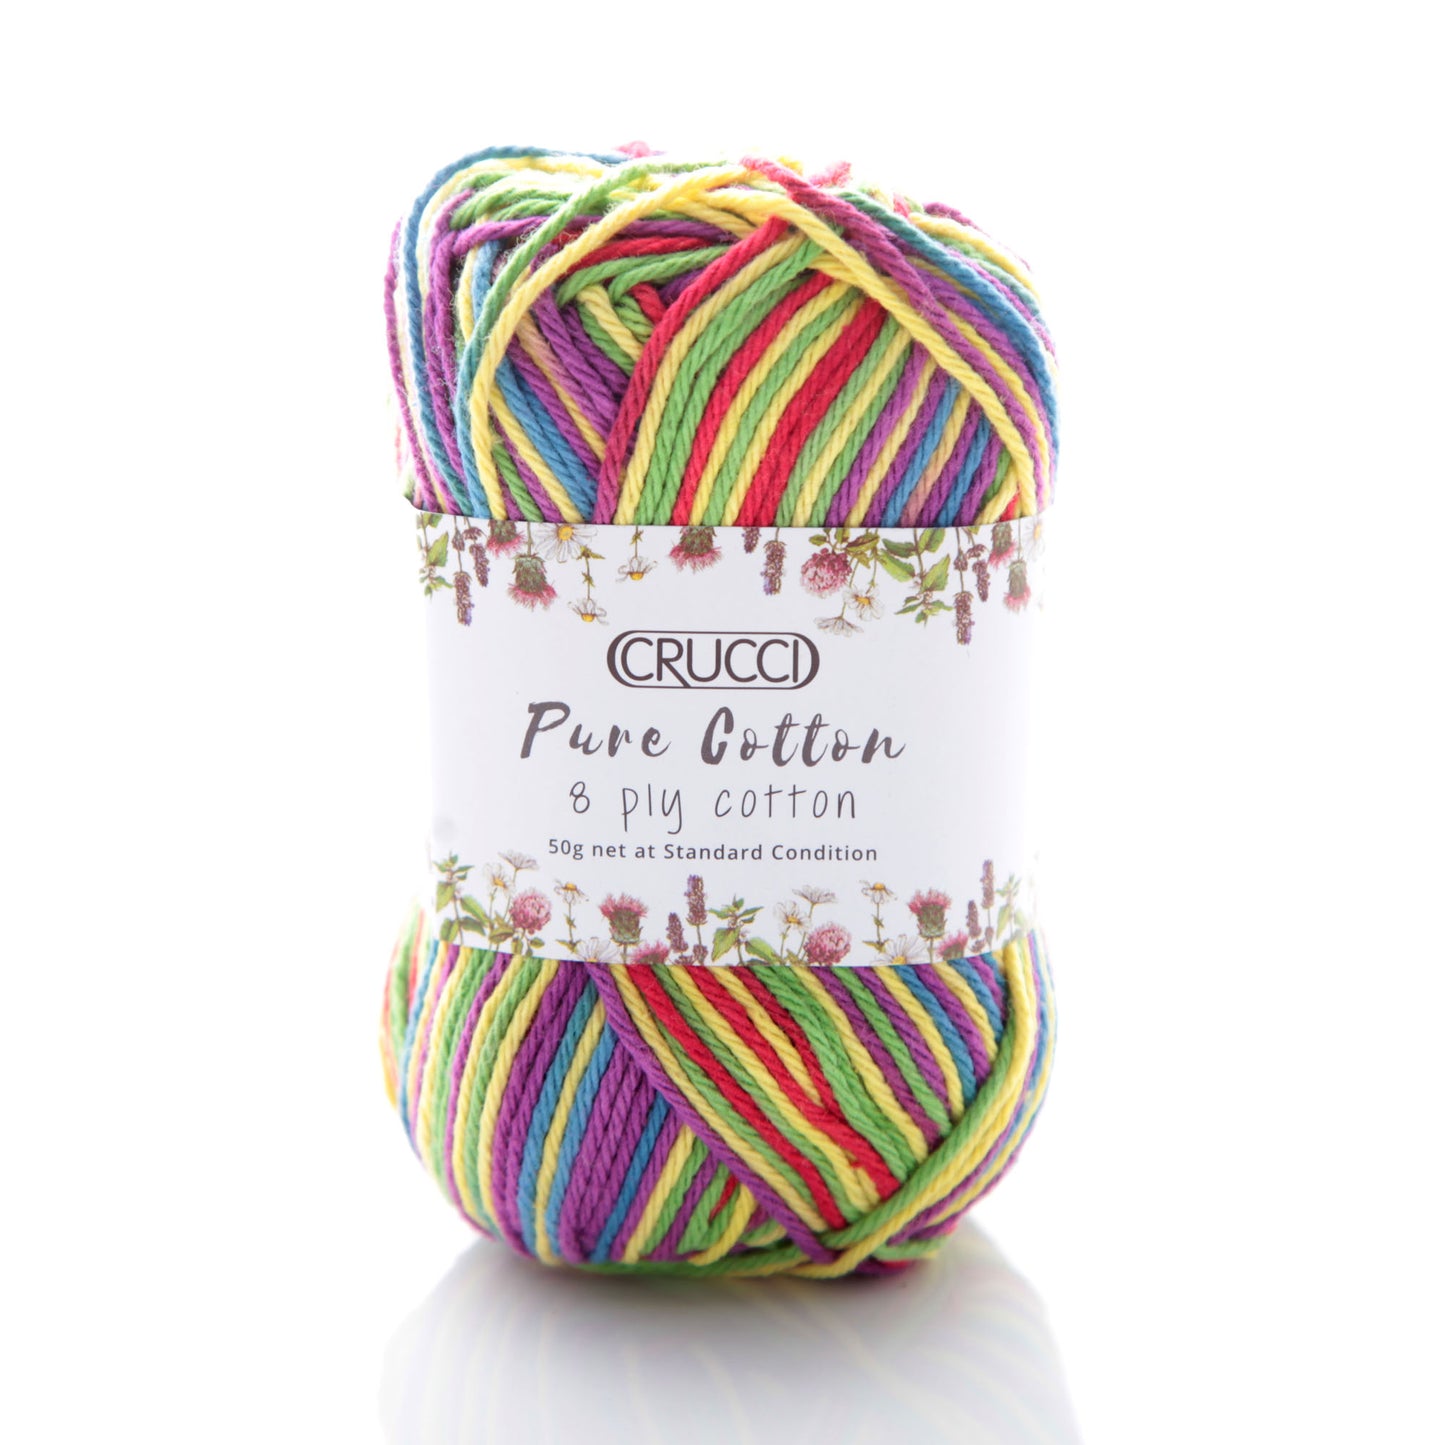 Pure Cotton 8 Ply Variegated